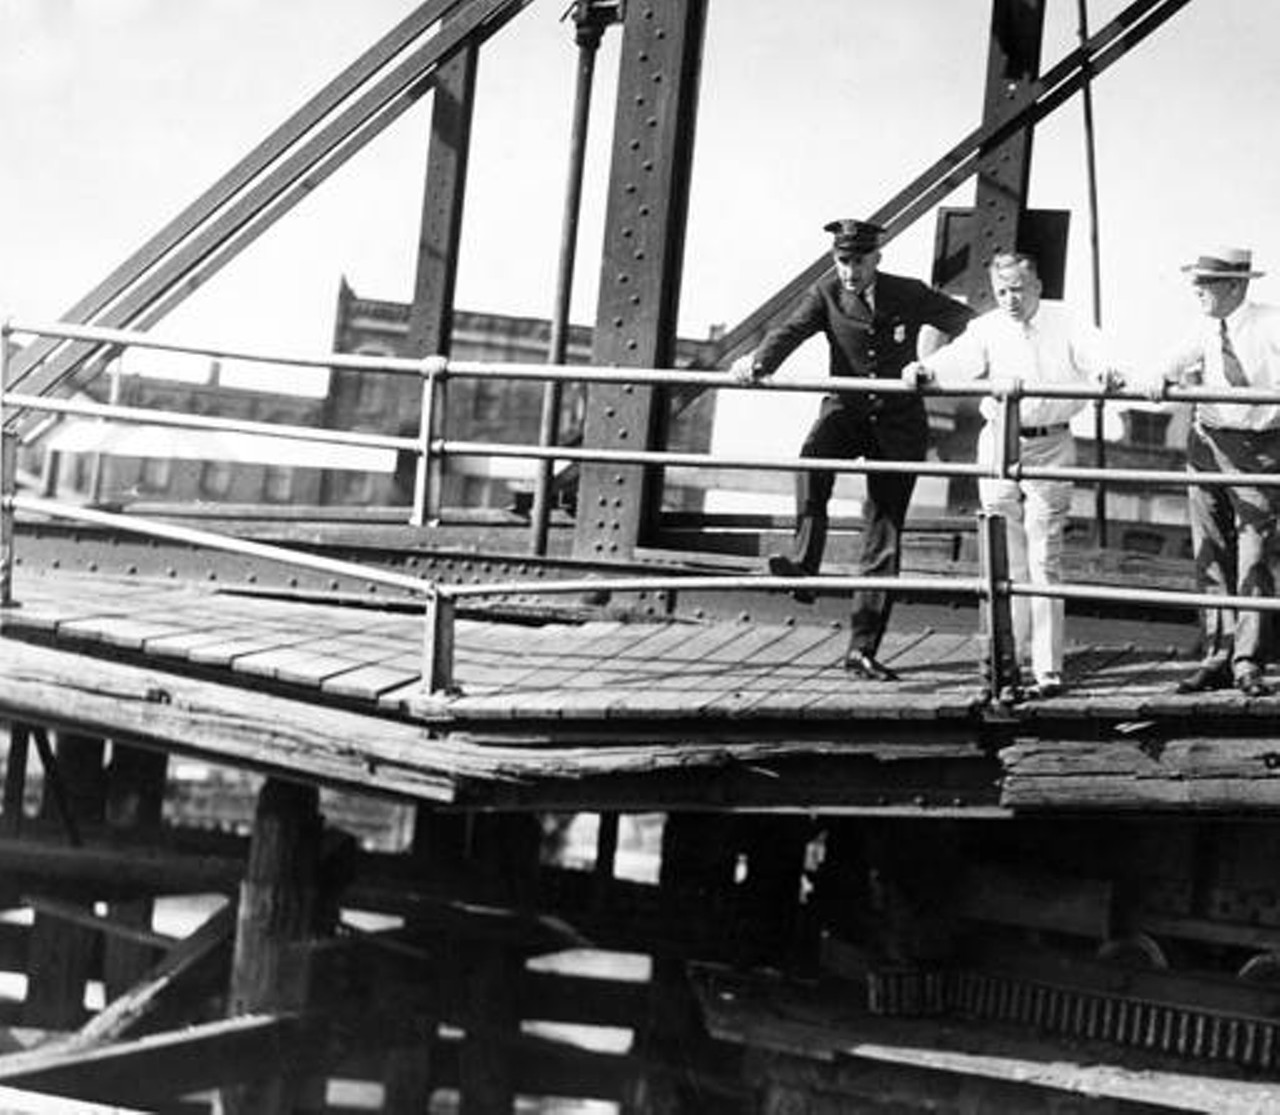 Men standing on the wooden deck, date unlisted.